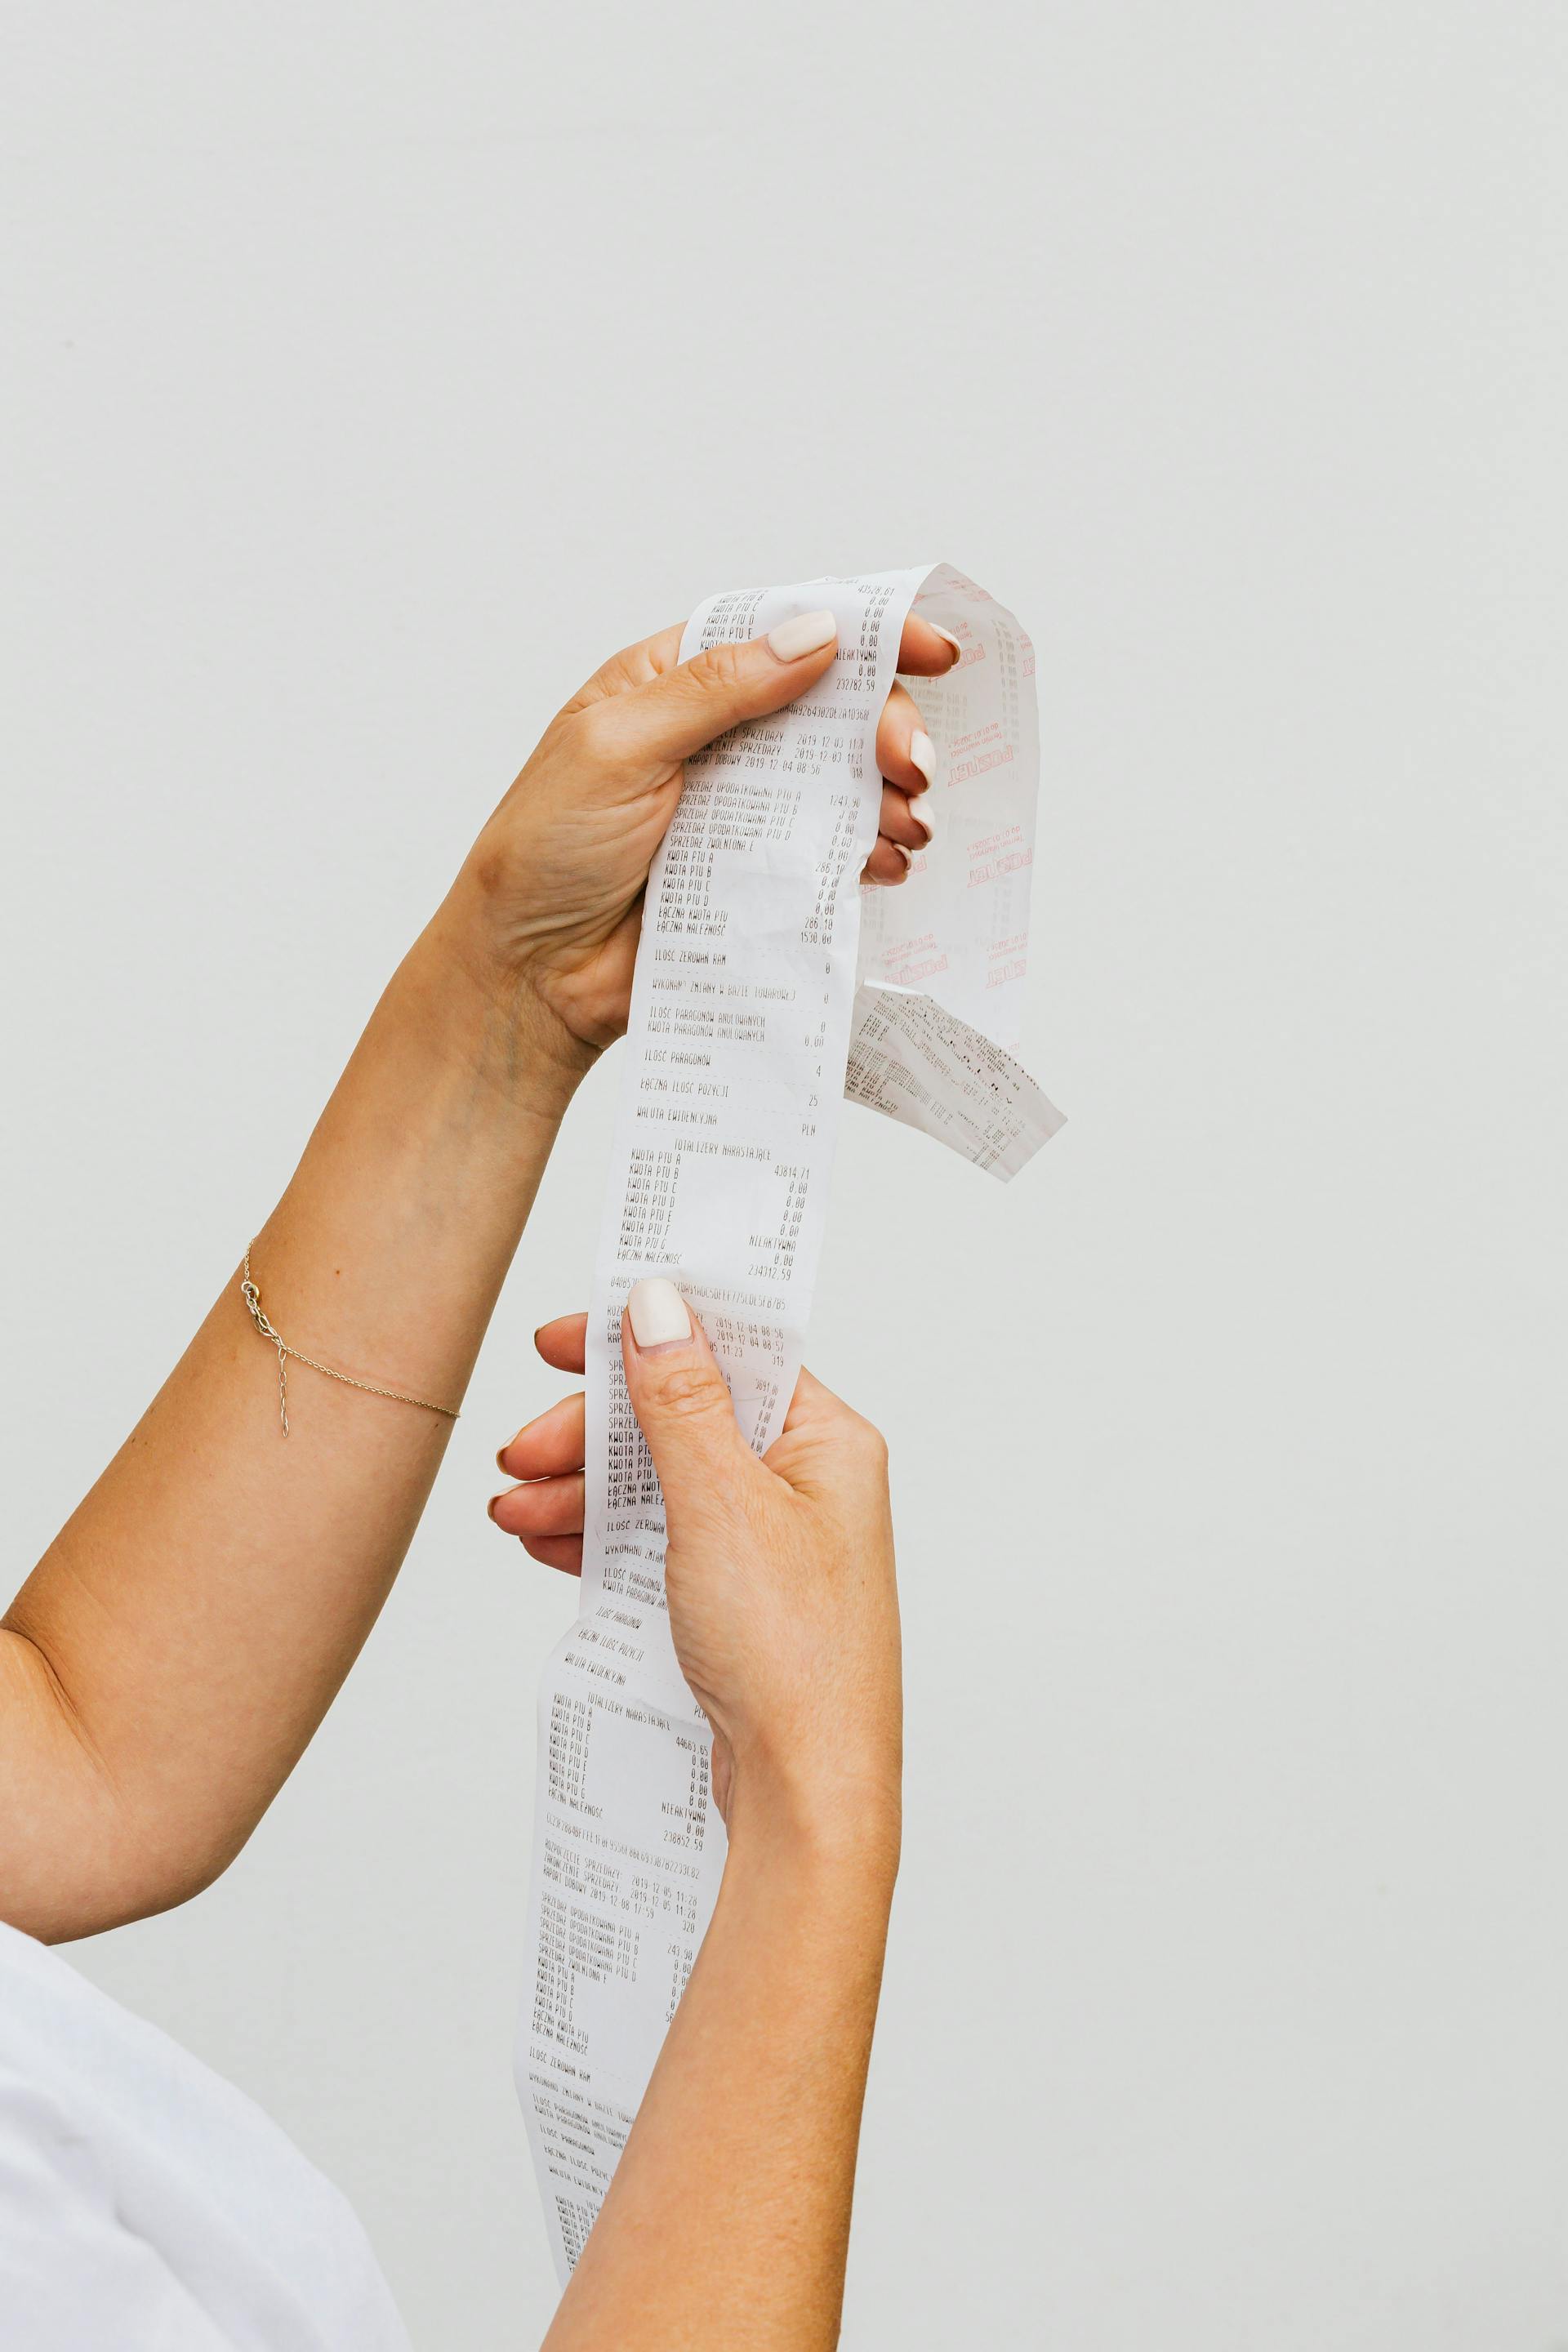 A person holding a receipt | Source: Pexels